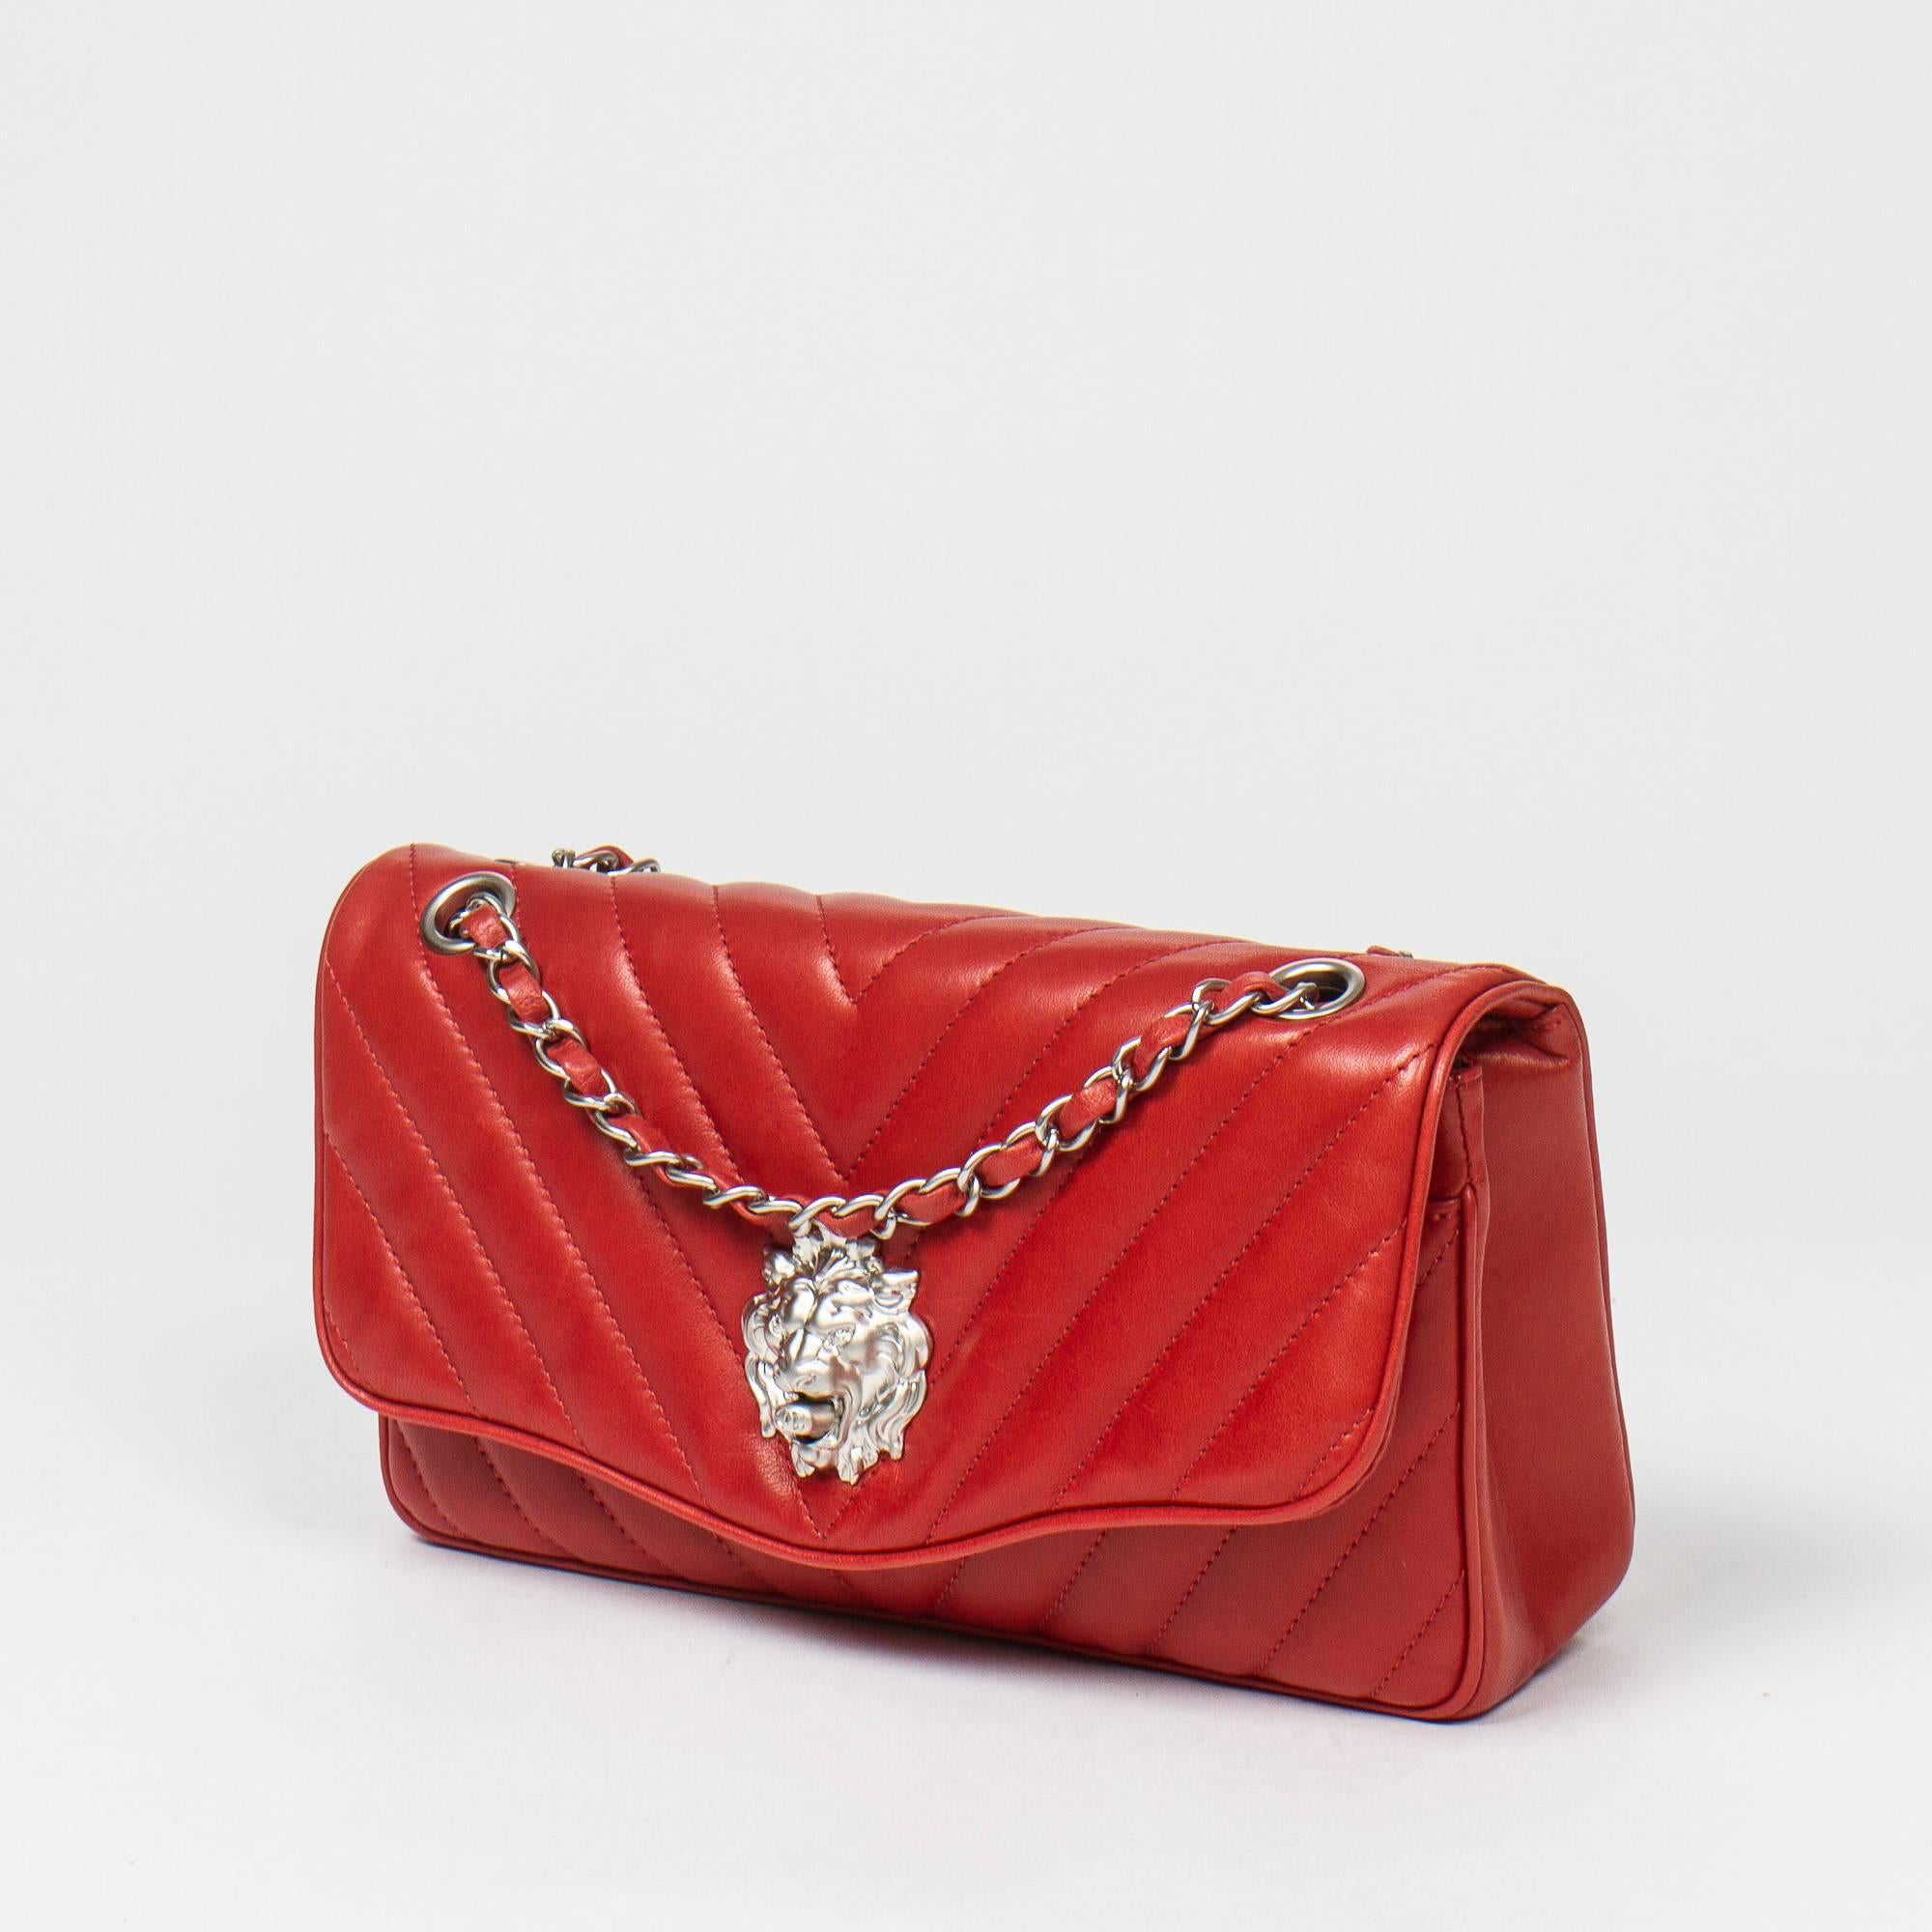 Classic Double Flap 26 in dark red quilted leather, double chain strap interlaced with leather, silver closure lion head shape, silver tone hardware. Back slip pocket. Red leather lined interior with 3 slip pockets. Silver tone heat stamp 